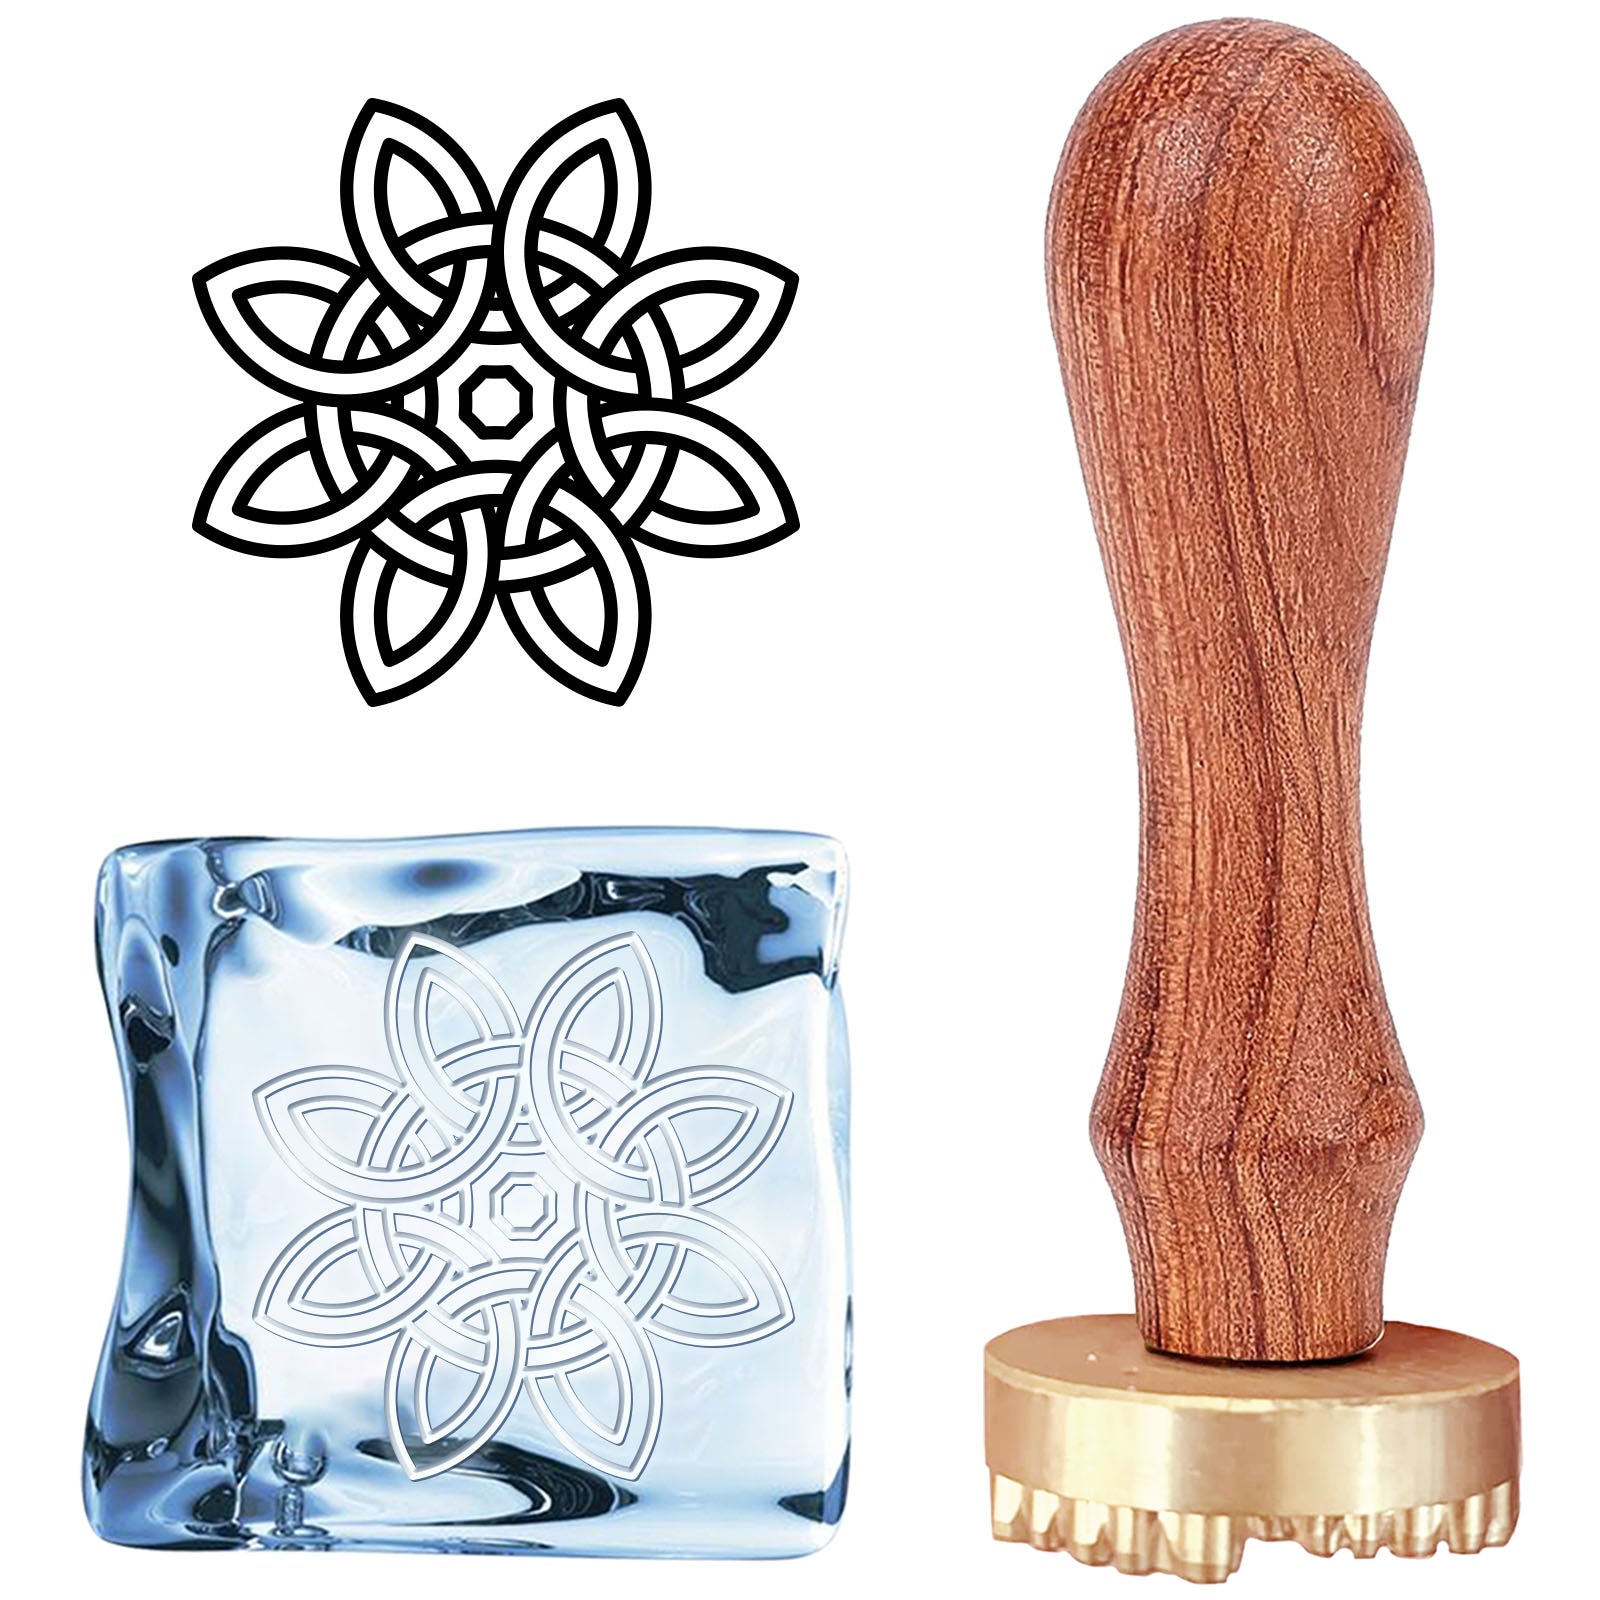 CRASPIRE Celtic Knot Ice Stamp Wood Handle Wax Seal Stamp